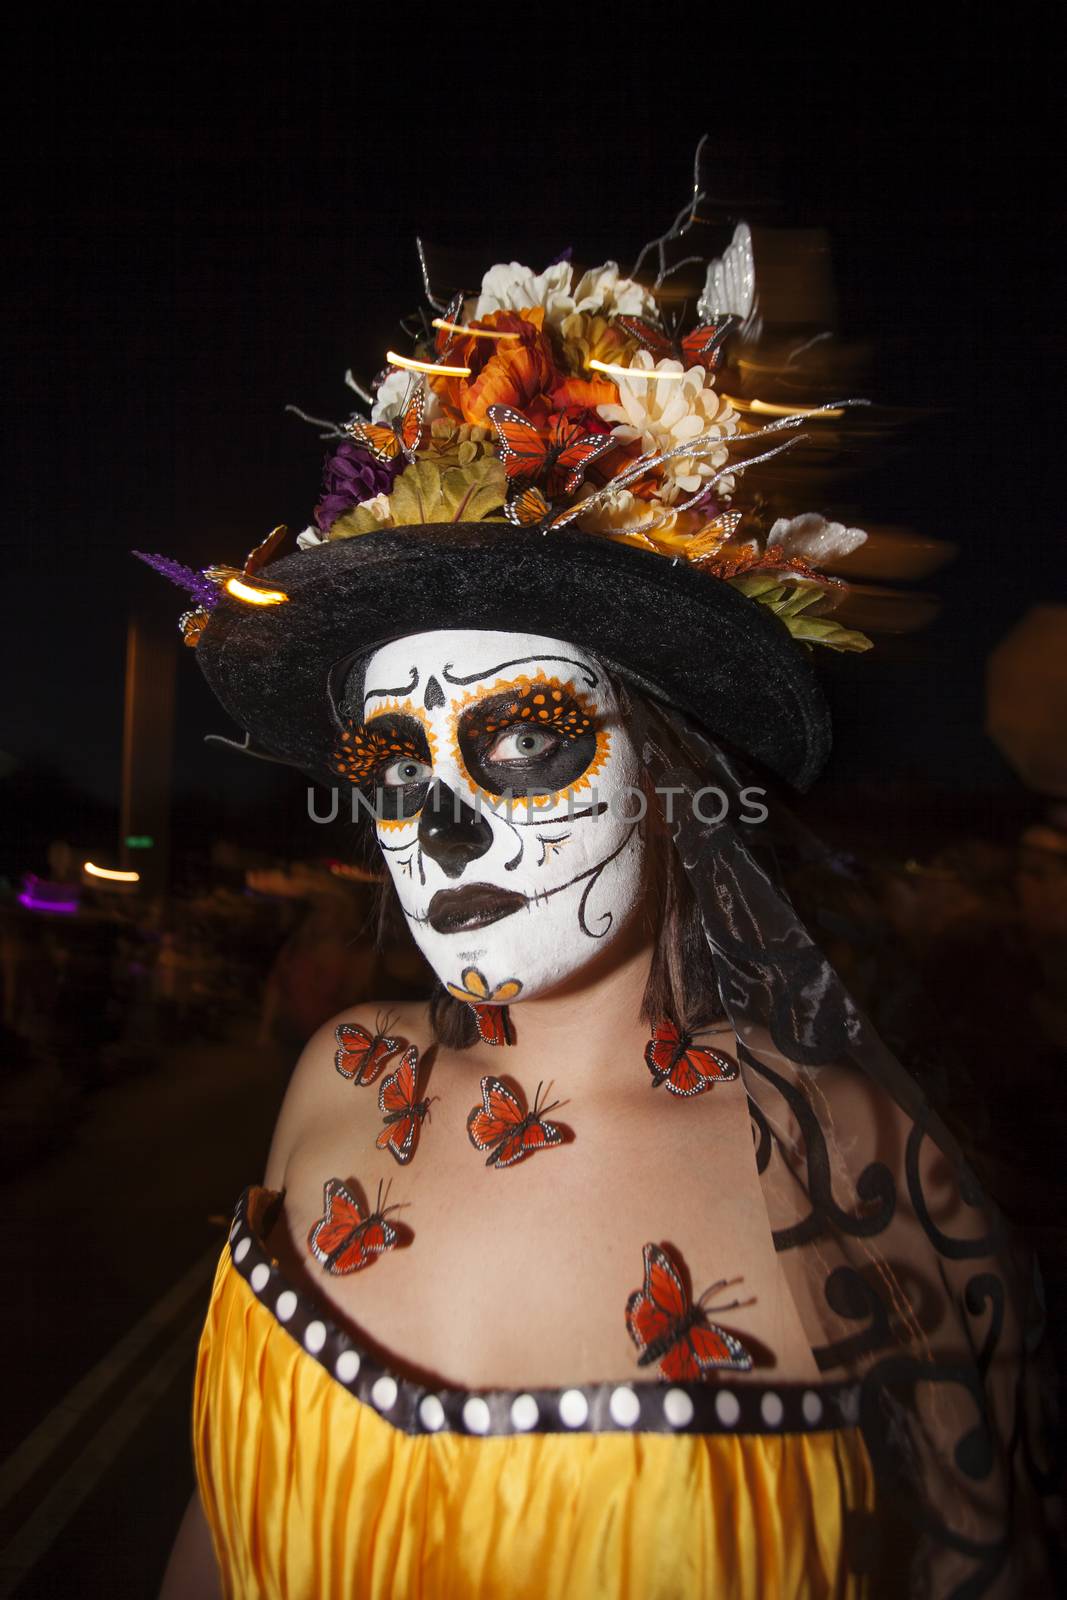 TUCSON, AZ/USA - NOVEMBER 09: Unidentified young woman with facepaint and butterfly adornments at the All Souls Procession on November 09, 2014 in Tucson, AZ, USA.